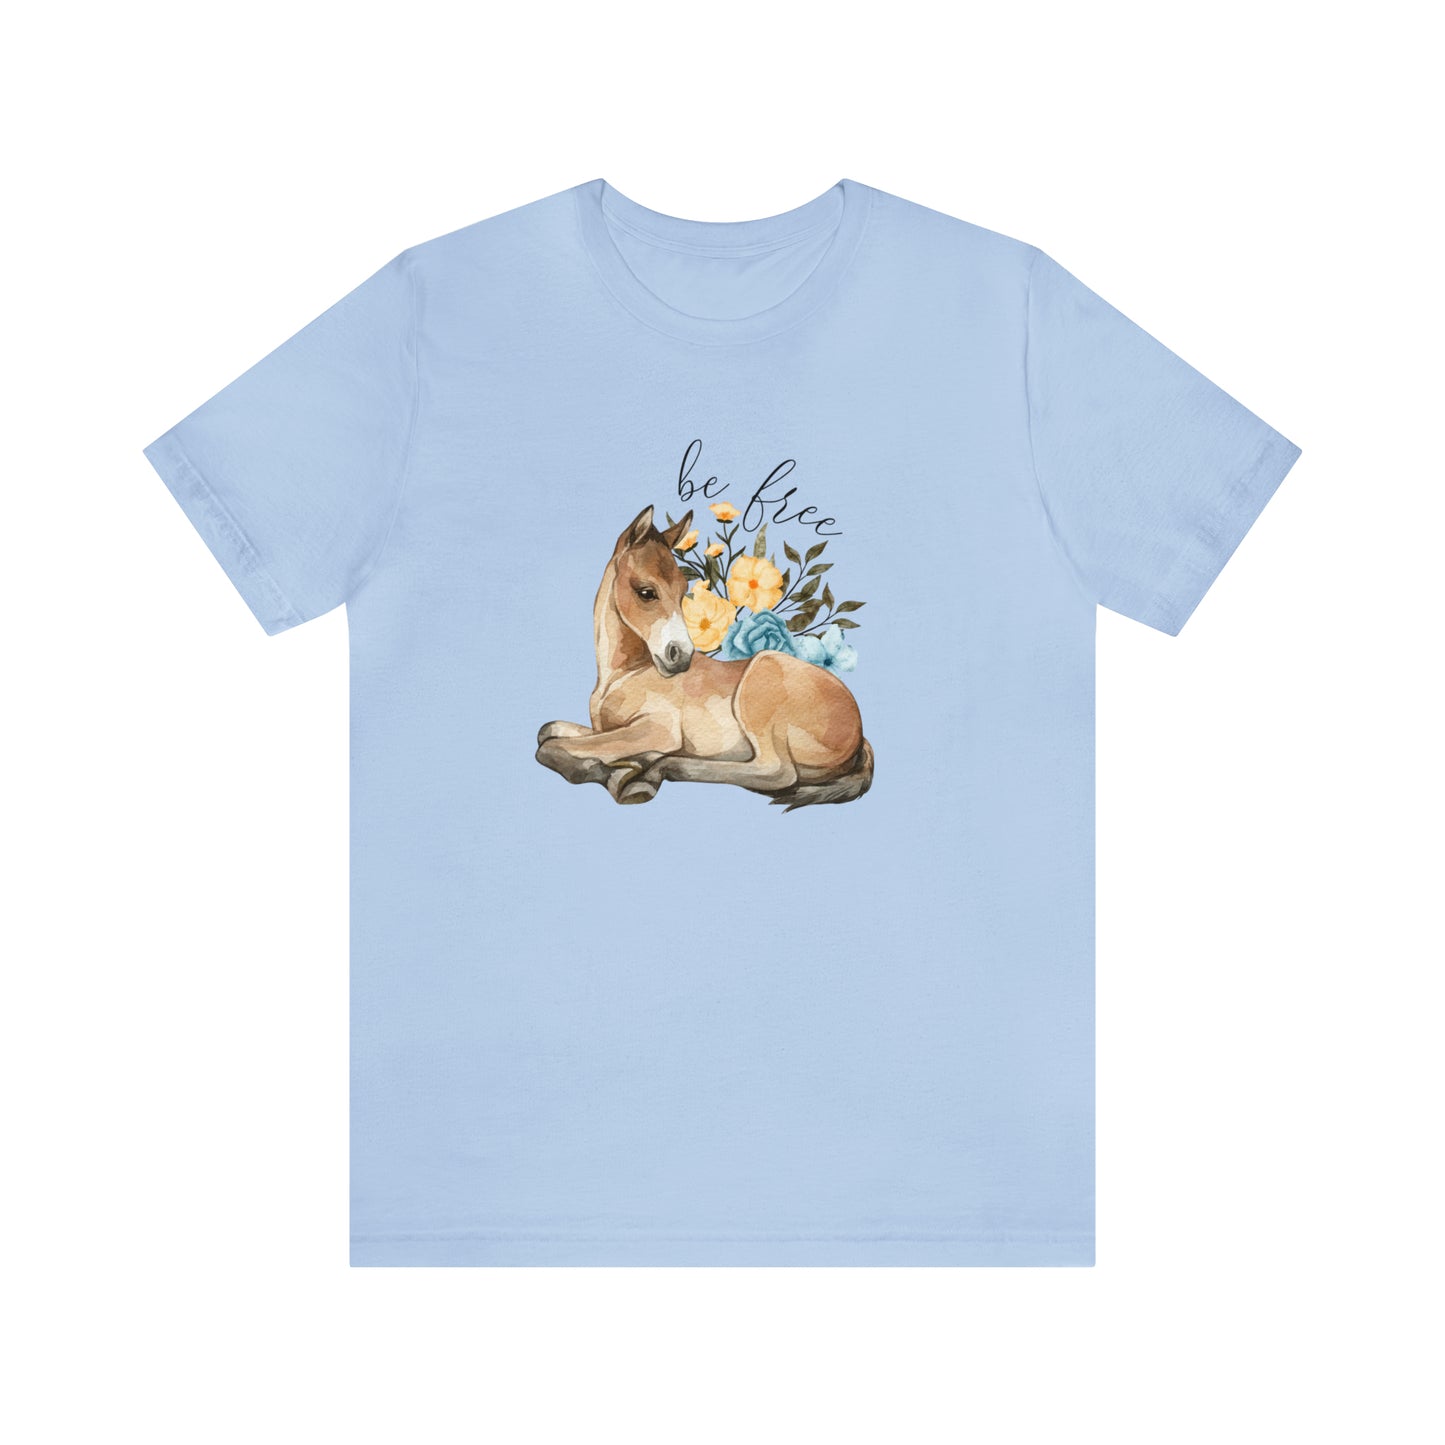 BE FREE - BABY BLUE TEE